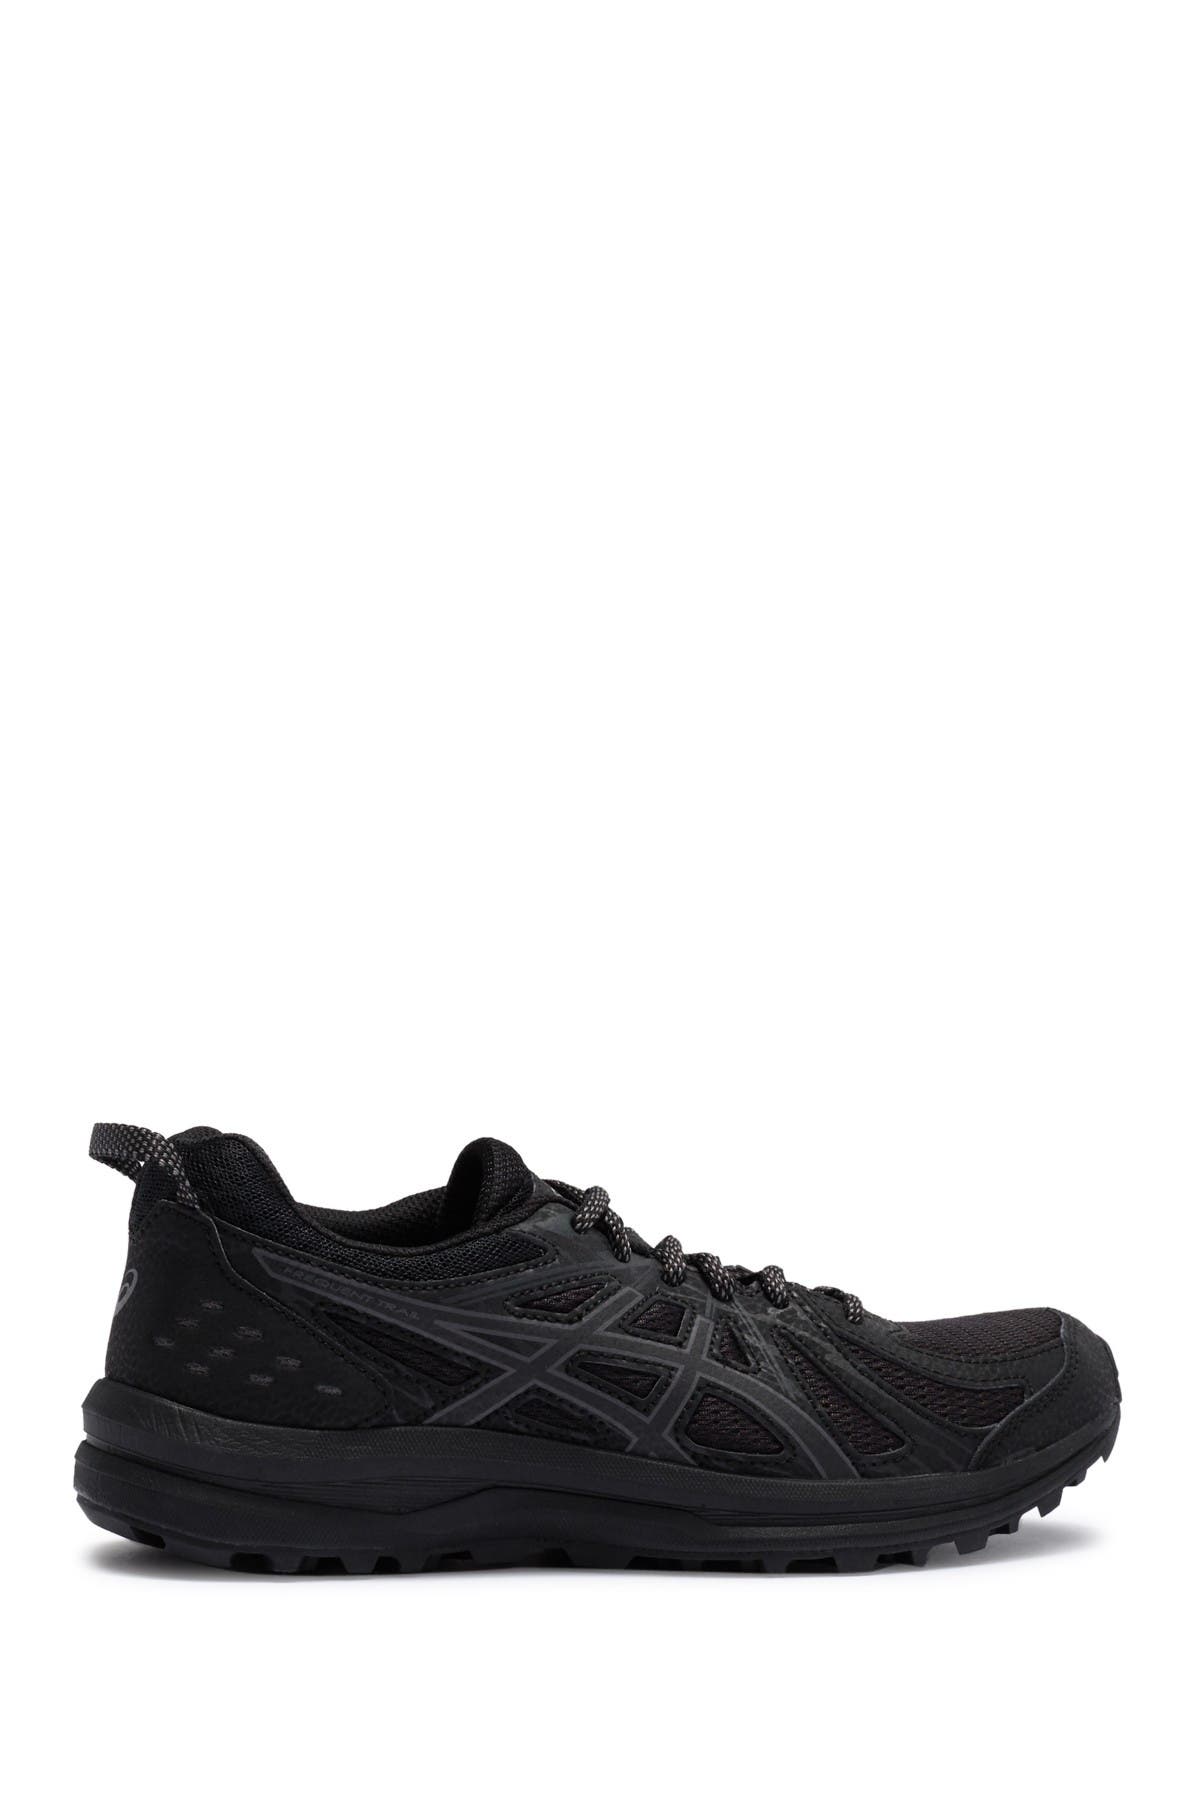 asics frequent trail shoe